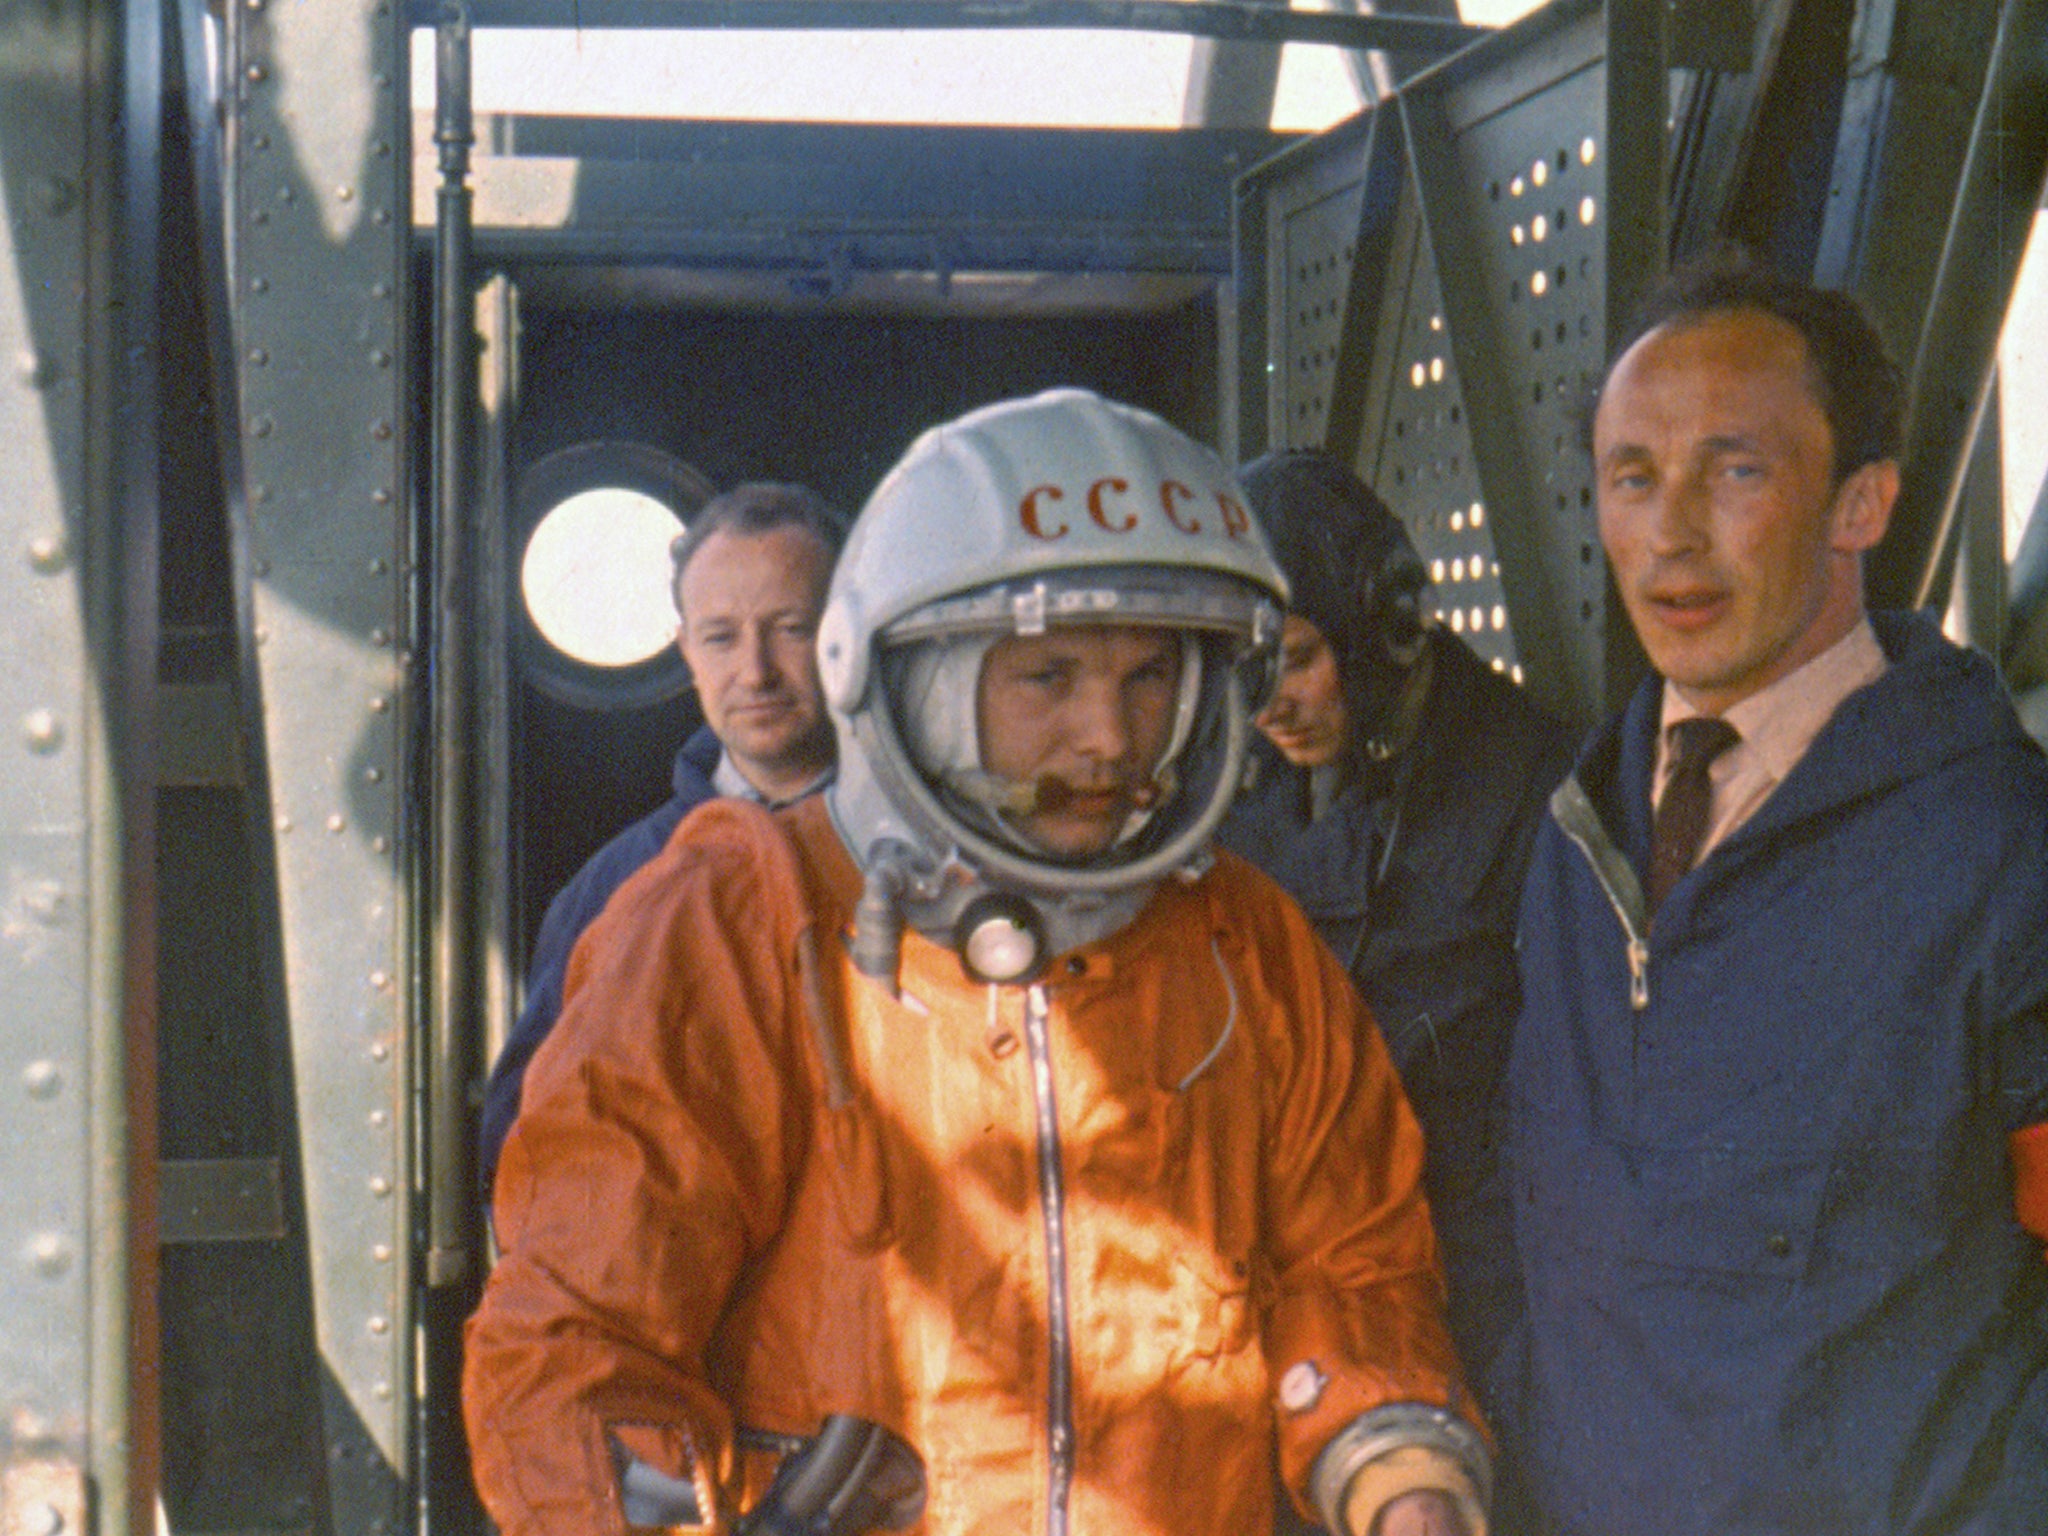 Soviet rocket scientist Oleg Ivanovsky played a central role in developing satellites at the dawn of the space age